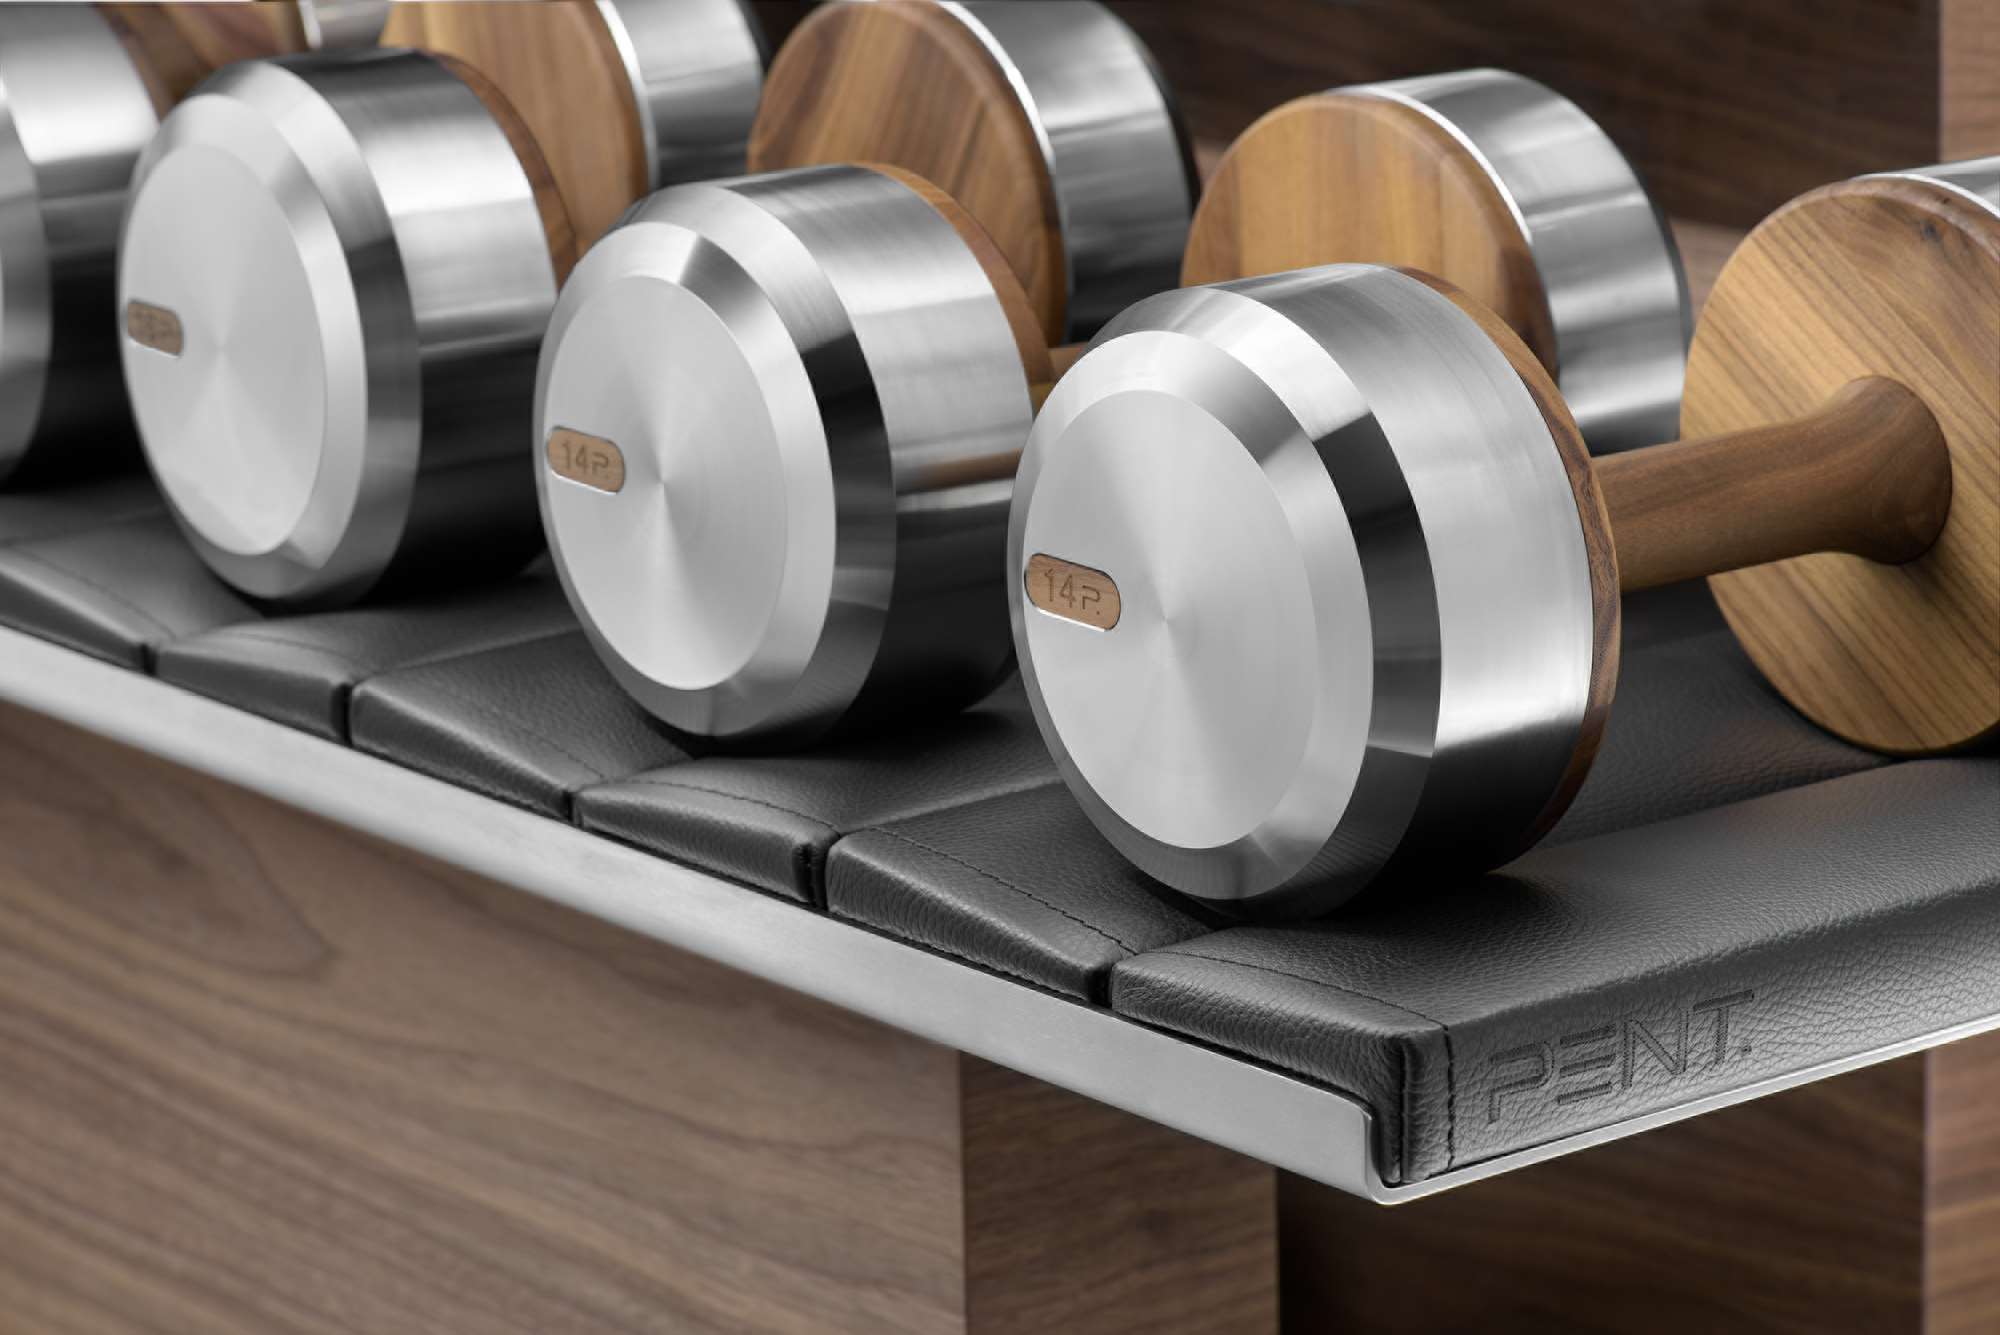 Luxury dumbbells made of wood and stainless steel